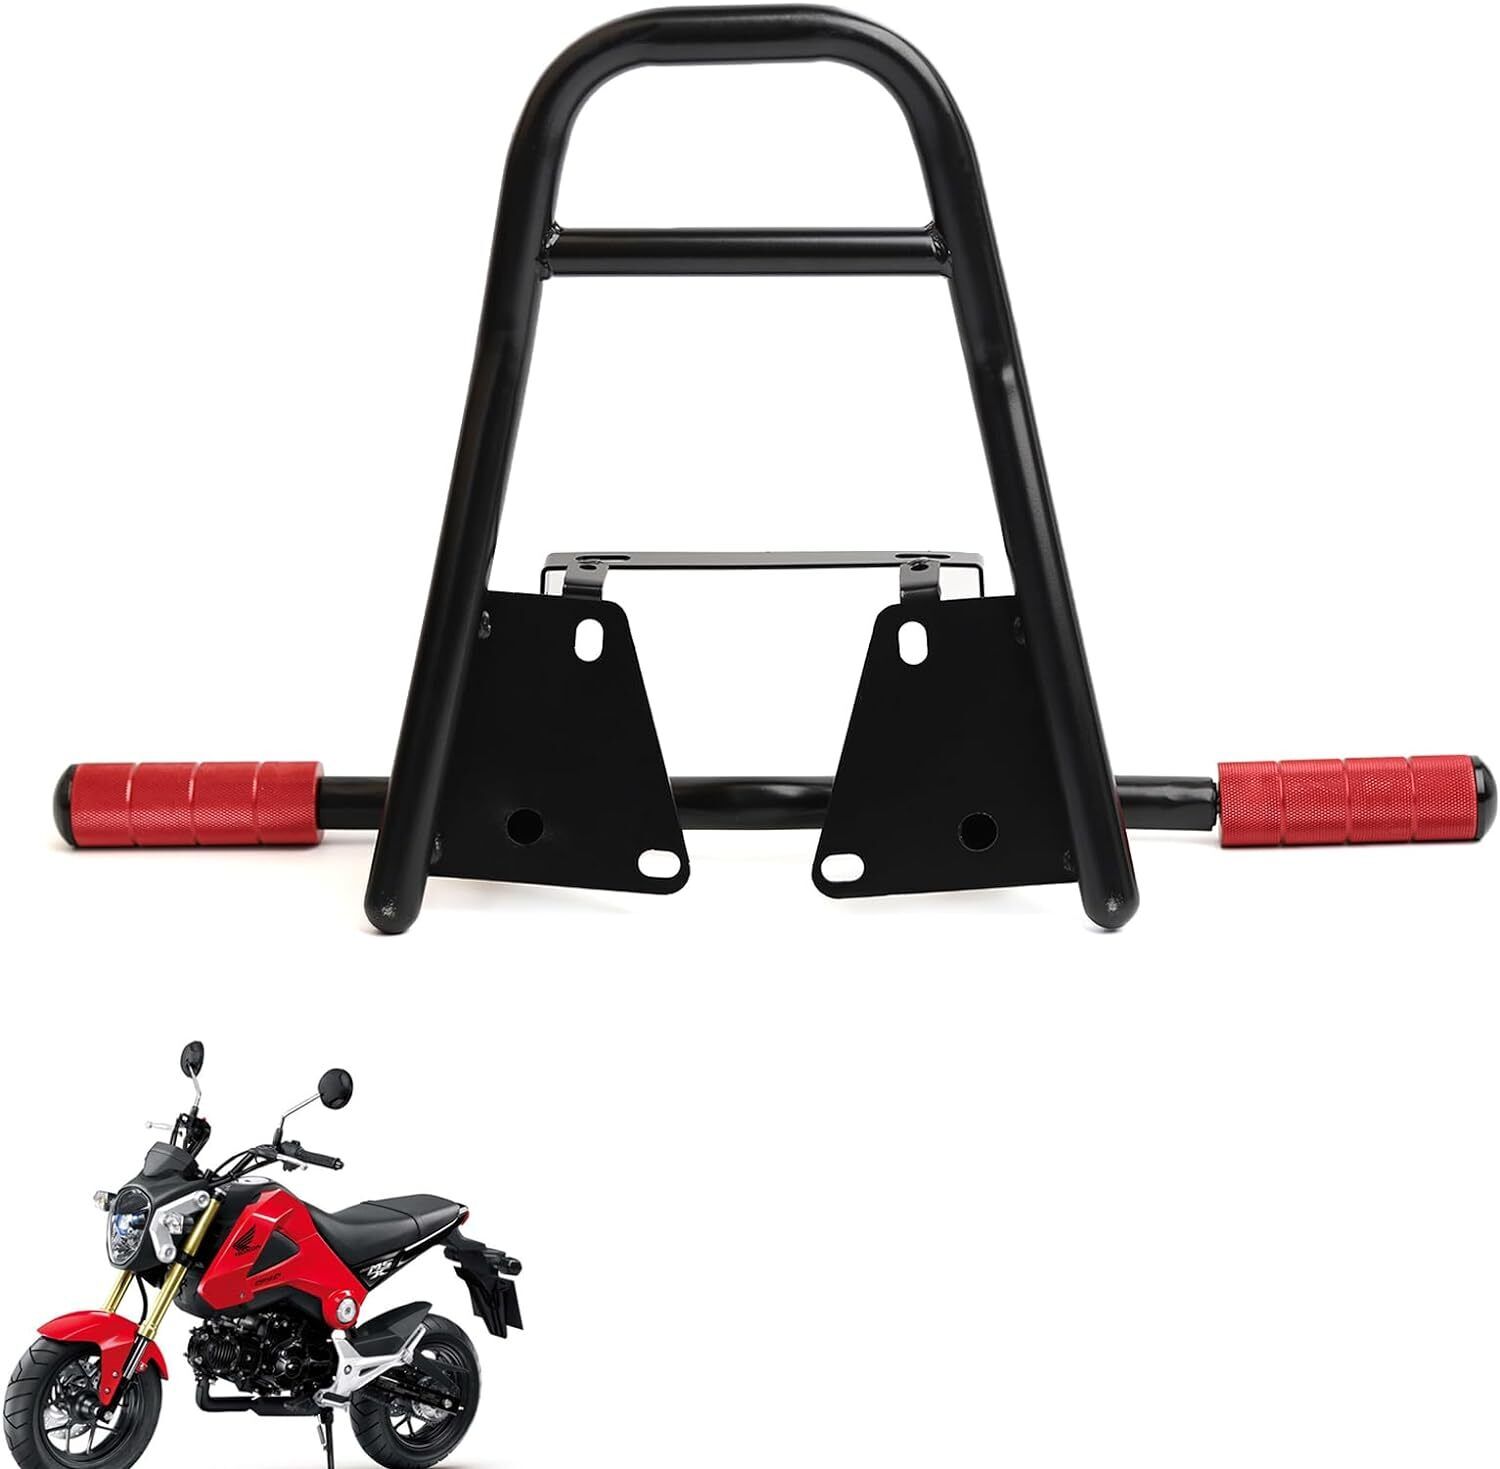 Motorcycle Stunt Rear Luggage with CNC Removable Perform Bar Fit for Honda Grom